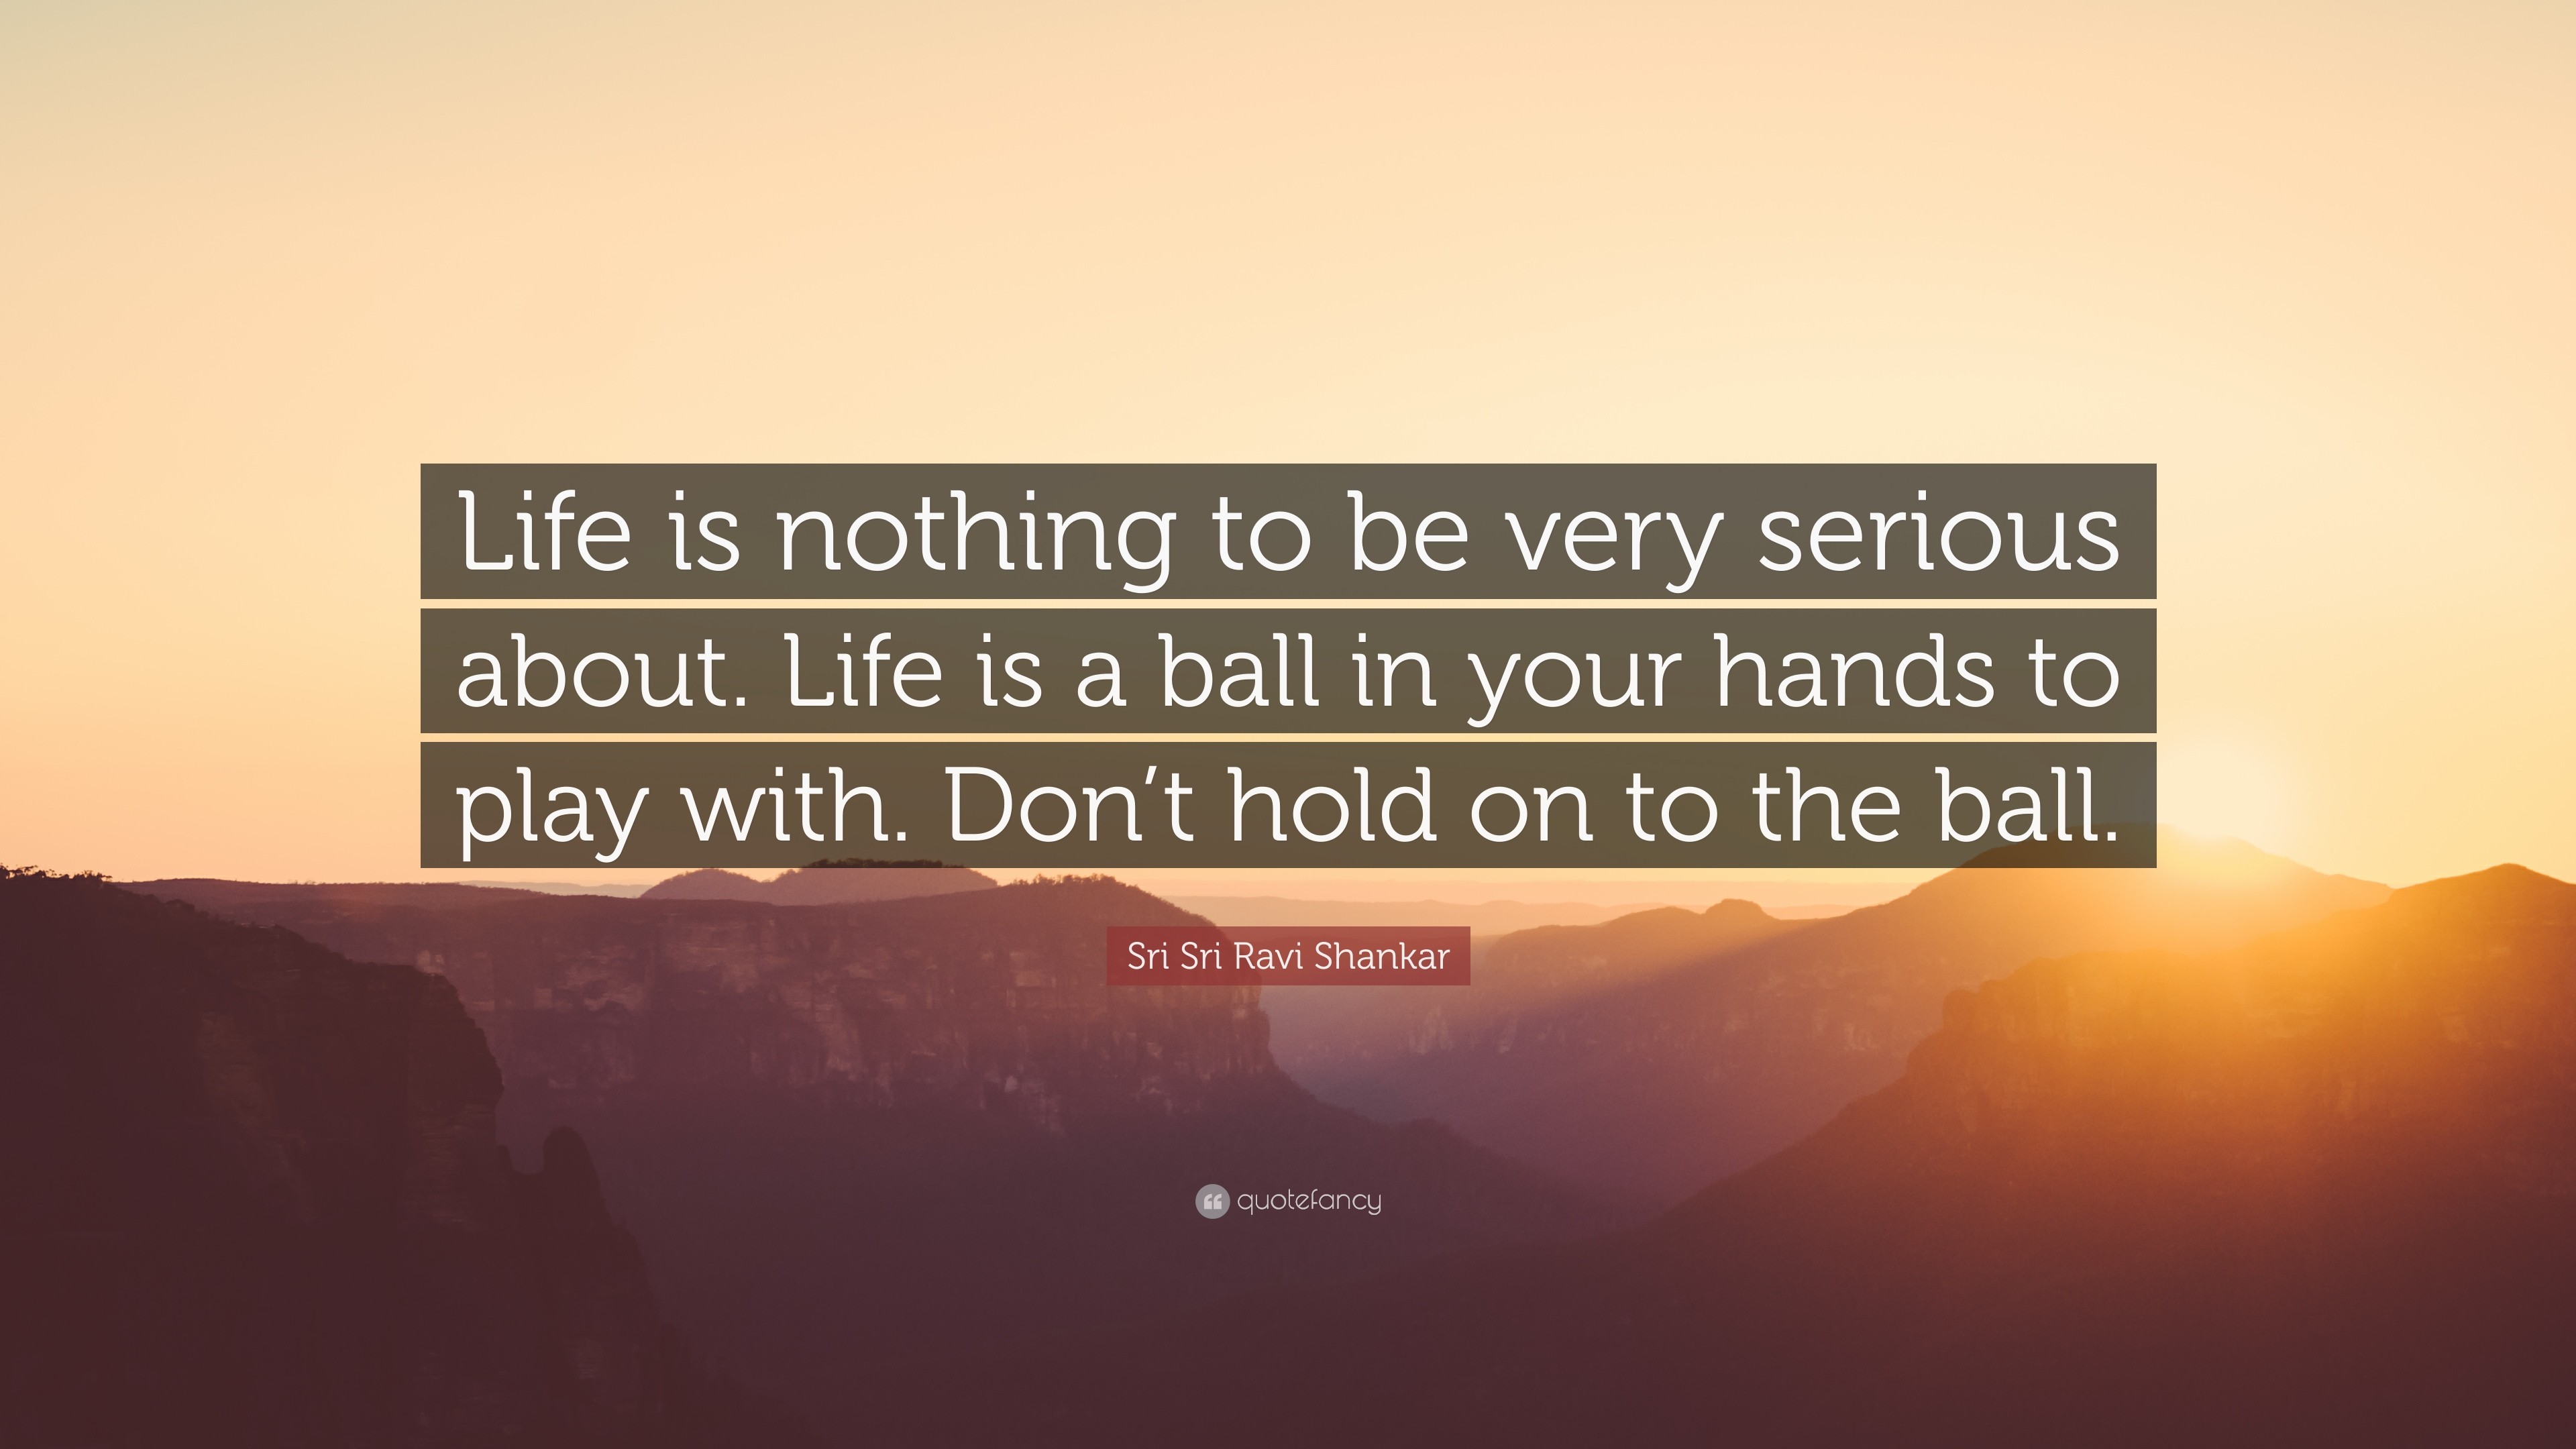 3840x2160 Sri Sri Ravi Shankar Quote: “Life is nothing to be very serious about.